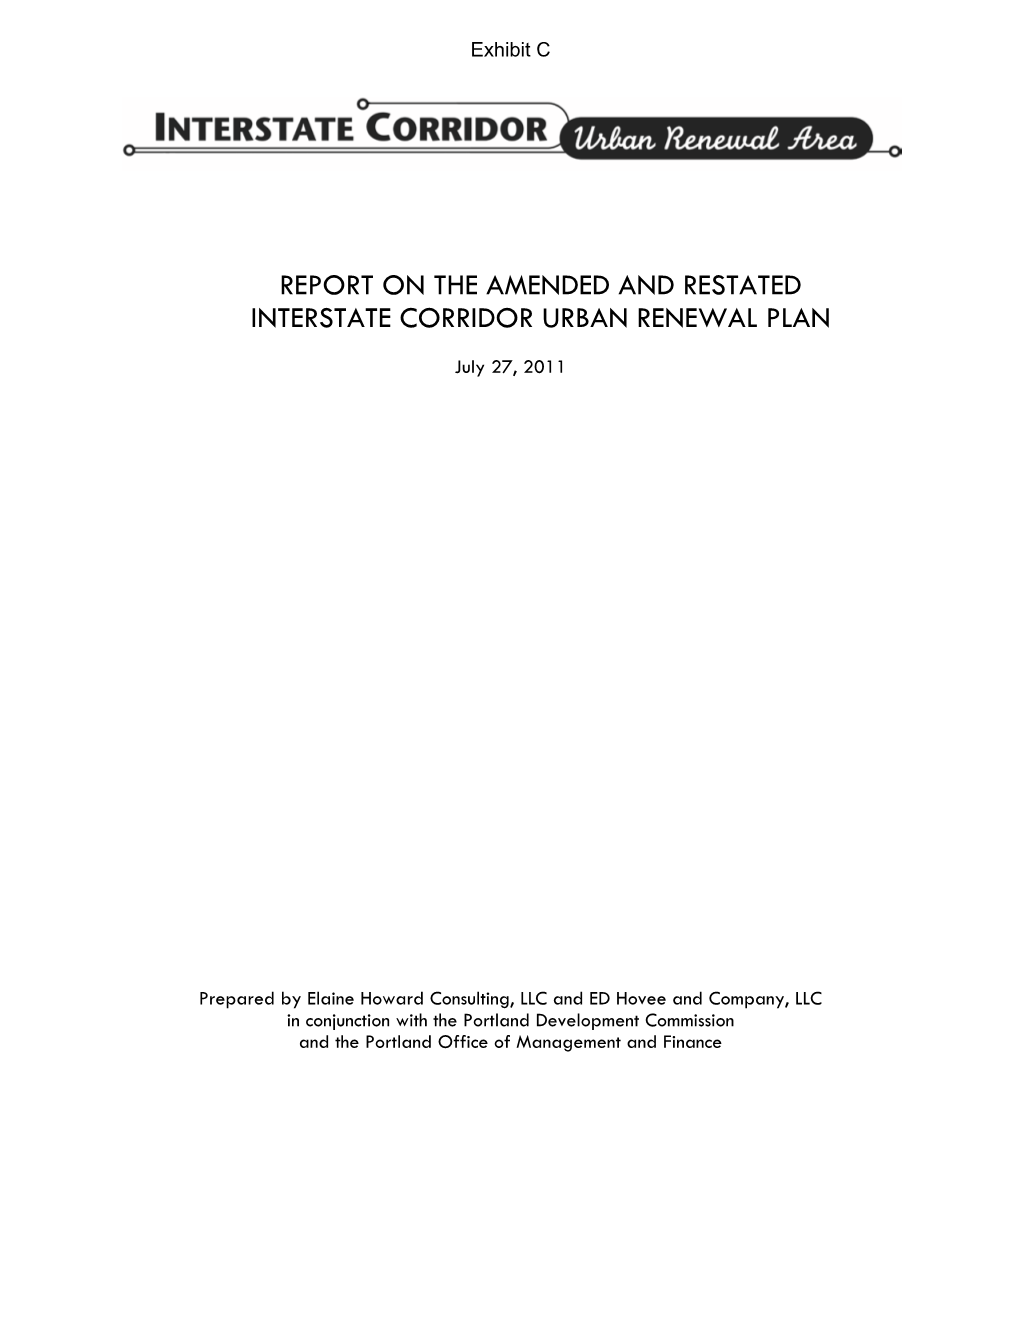 Report on the Amended and Restated Interstate Corridor Urban Renewal Plan